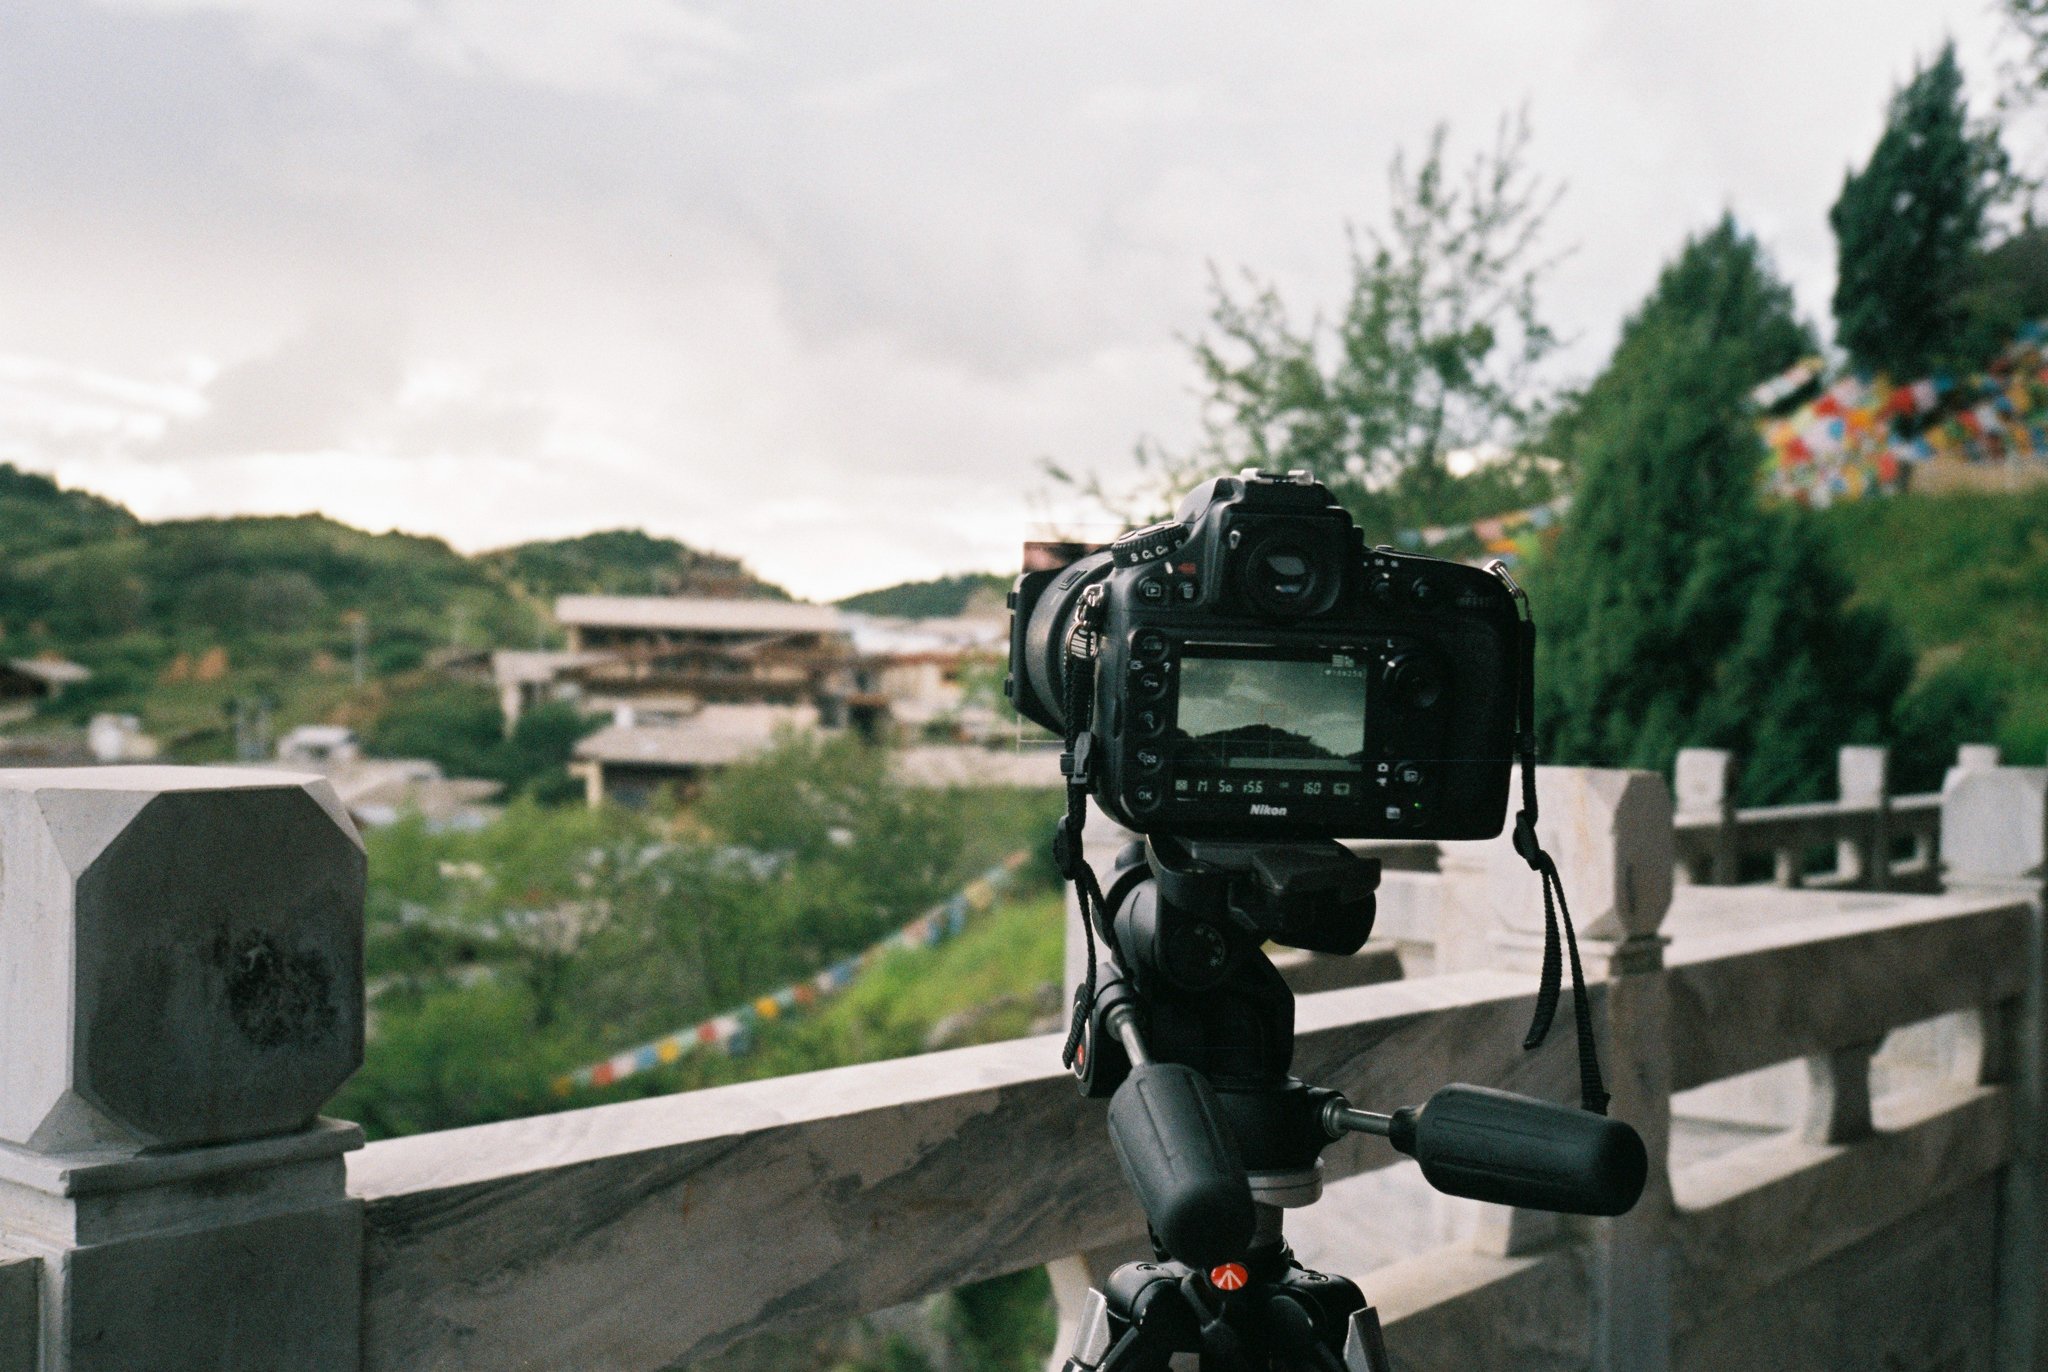 Timelapse in Dukezong Old Town. Close to Giant prayer wheel